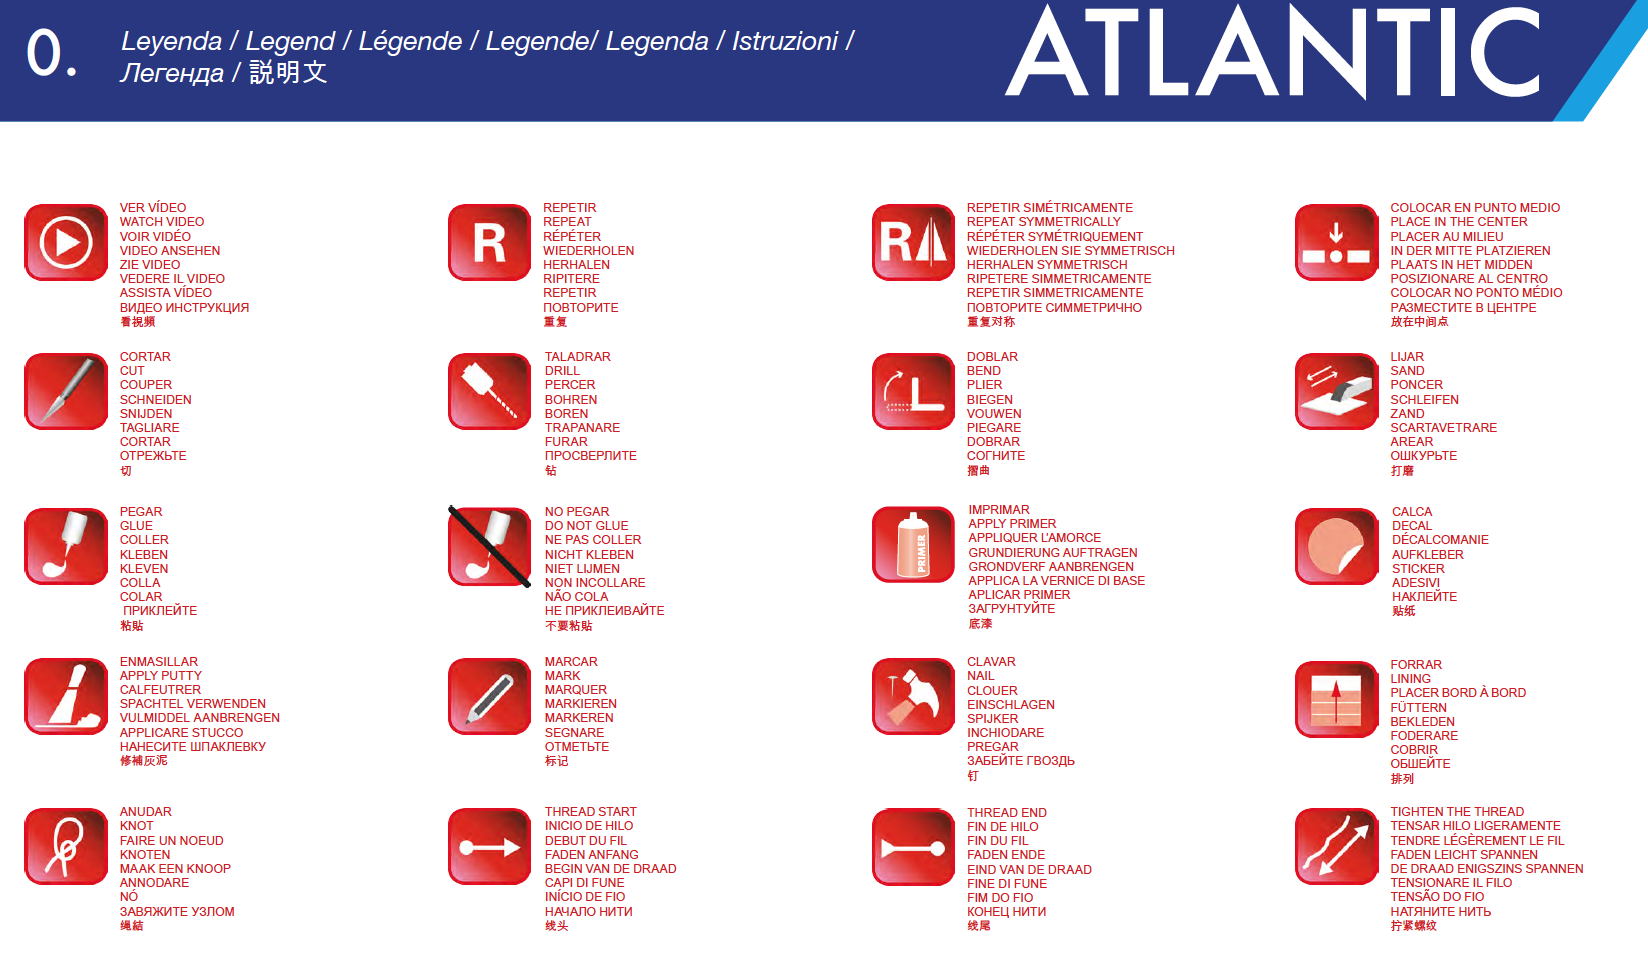 Assembly Guide for Tugboat Atlantic (20210) by Artesanía Latina.